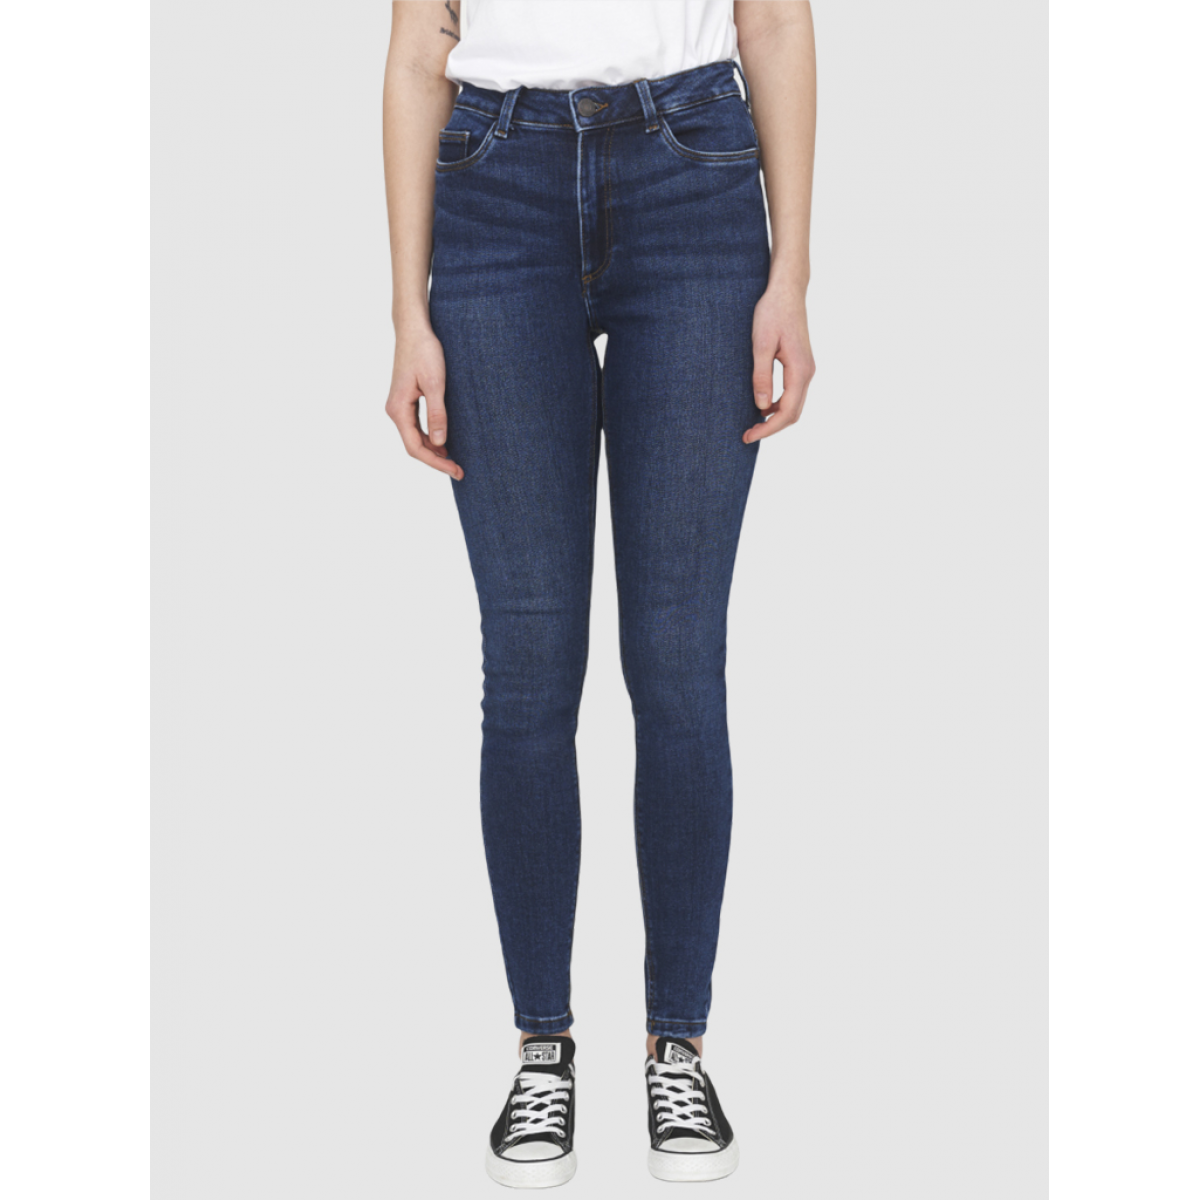 Jeans Mulher Callie Noisy May Jeans - 27012749.6